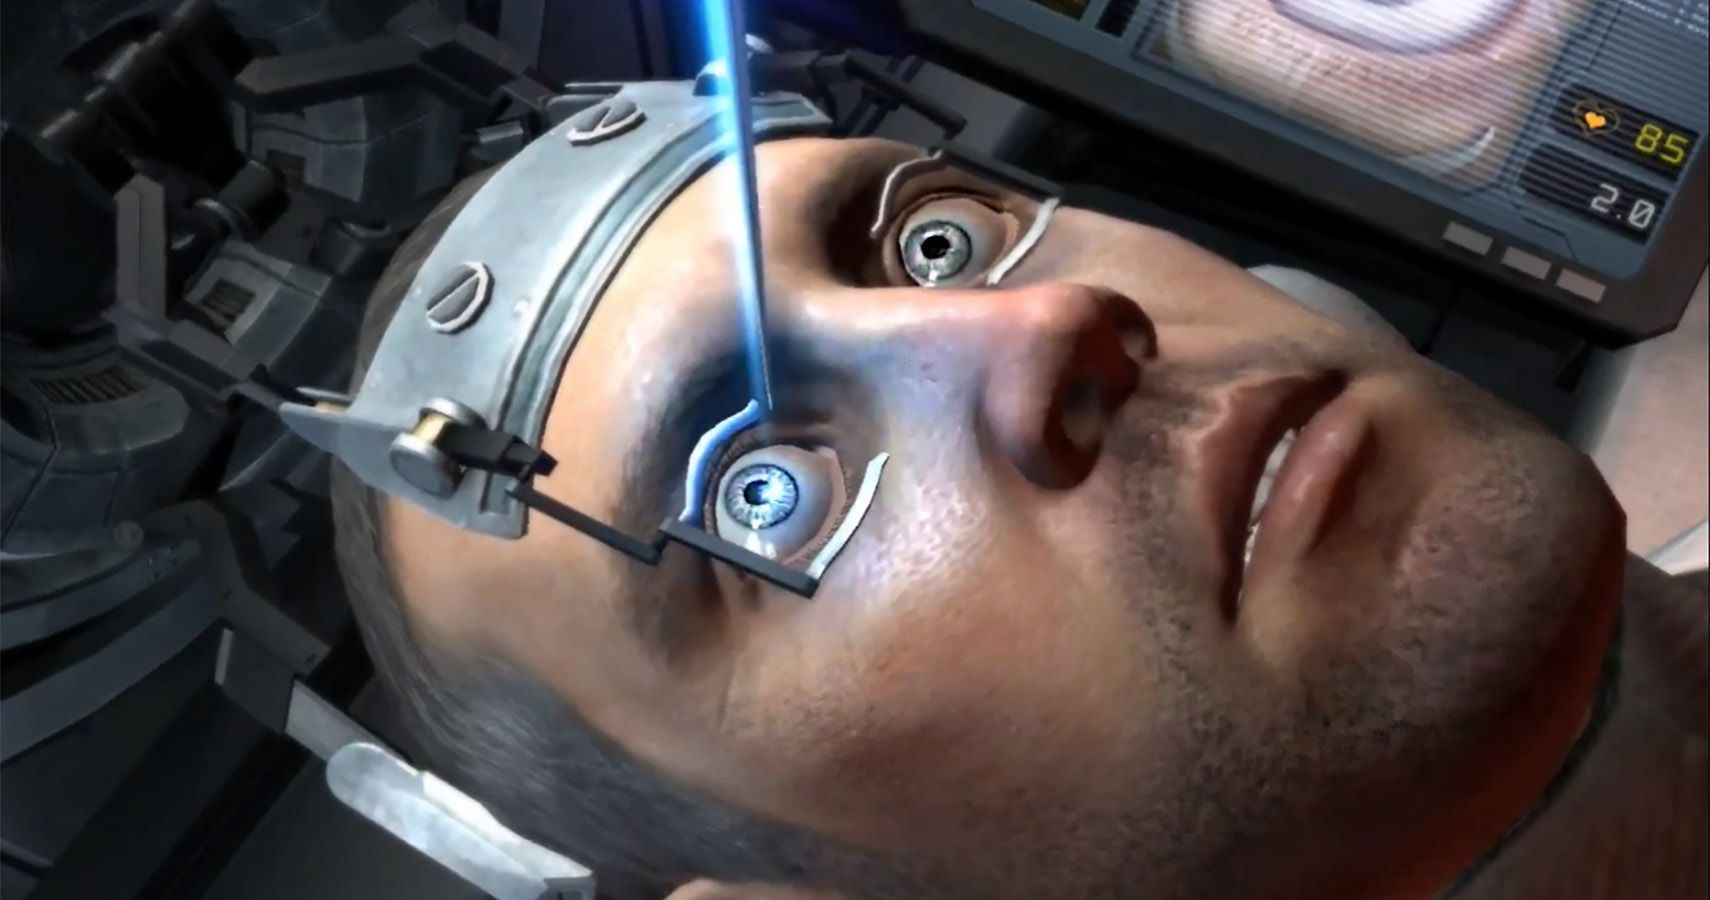 The Stick A Needle In Your Eye scene from Dead Space 2